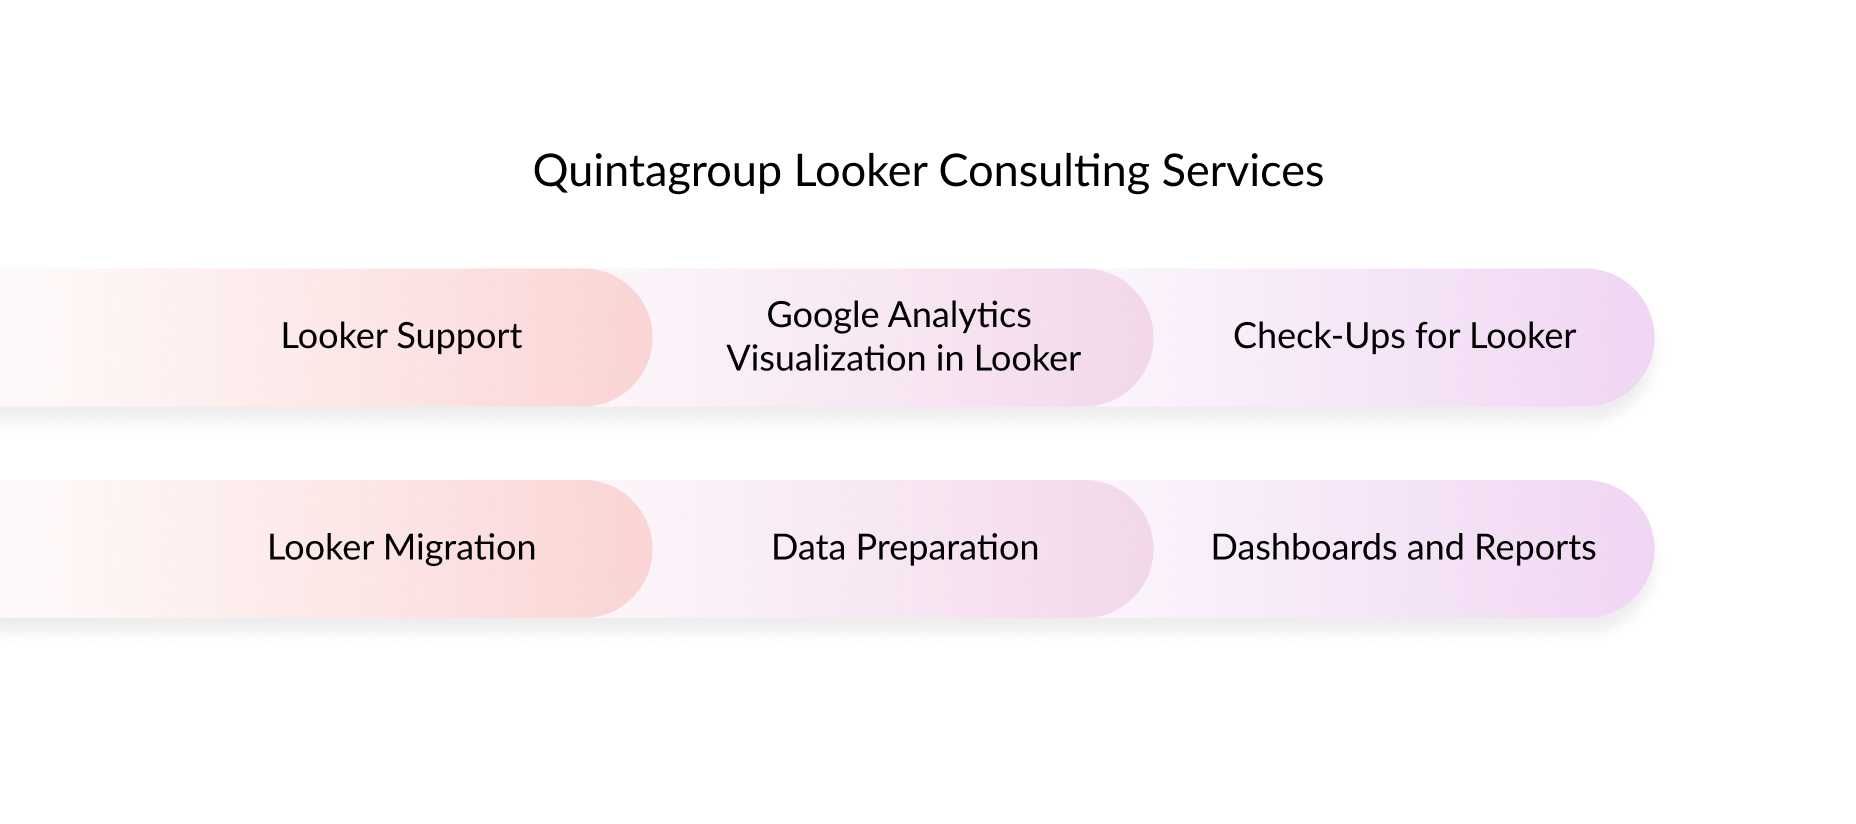 quintagroup looker consulting services